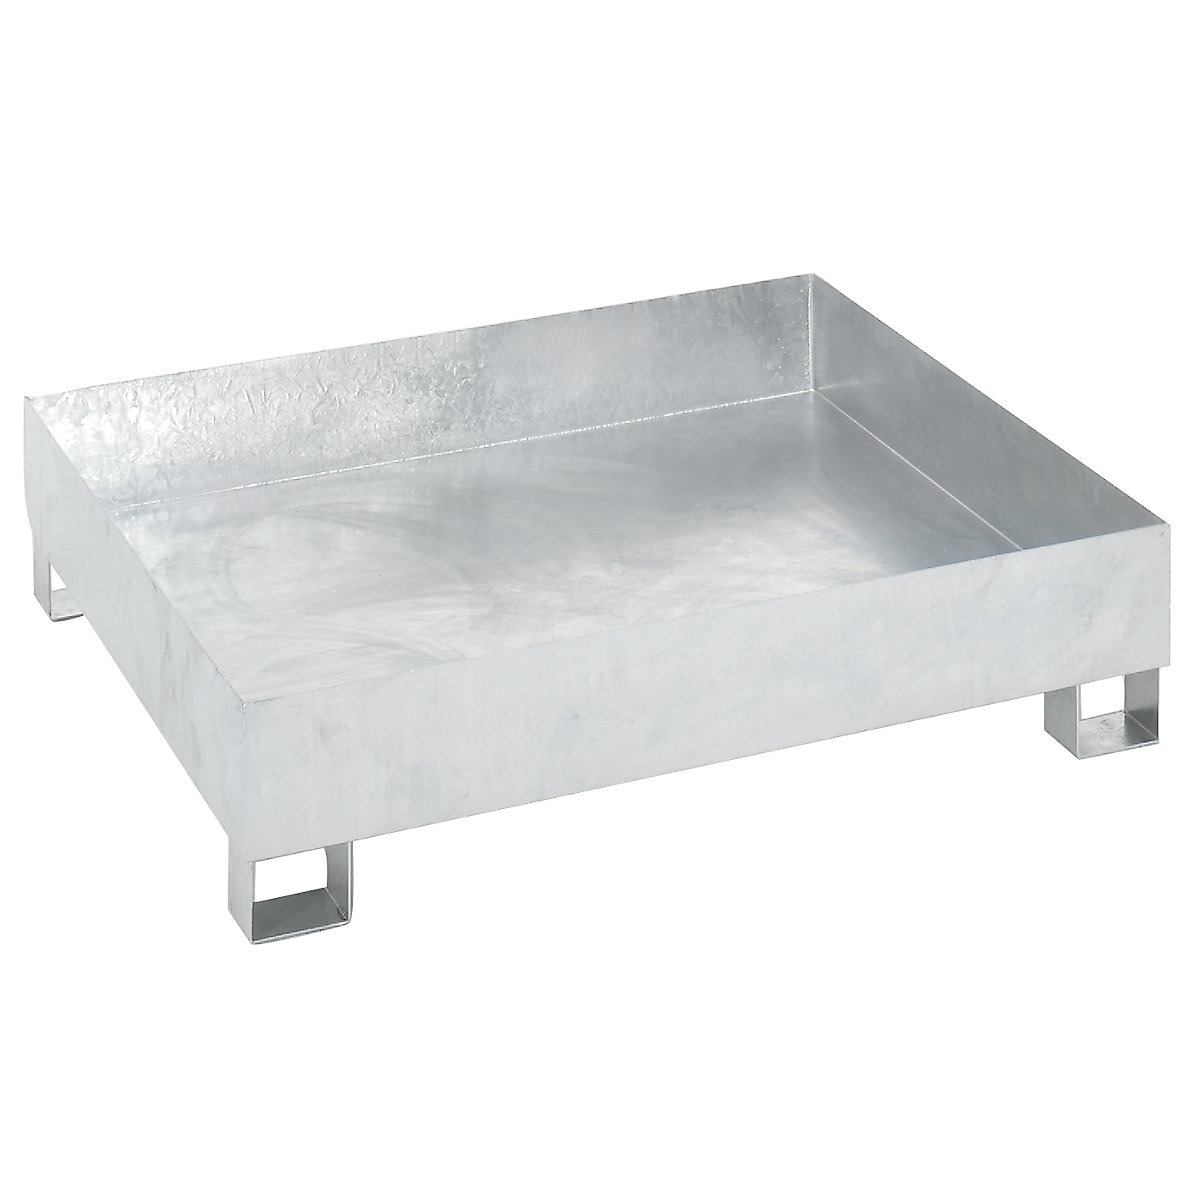 Steel sump tray for 200 l drums – eurokraft basic, LxWxH 1200 x 1200 x 285 mm, with certification, hot dip galvanised, without grate-3